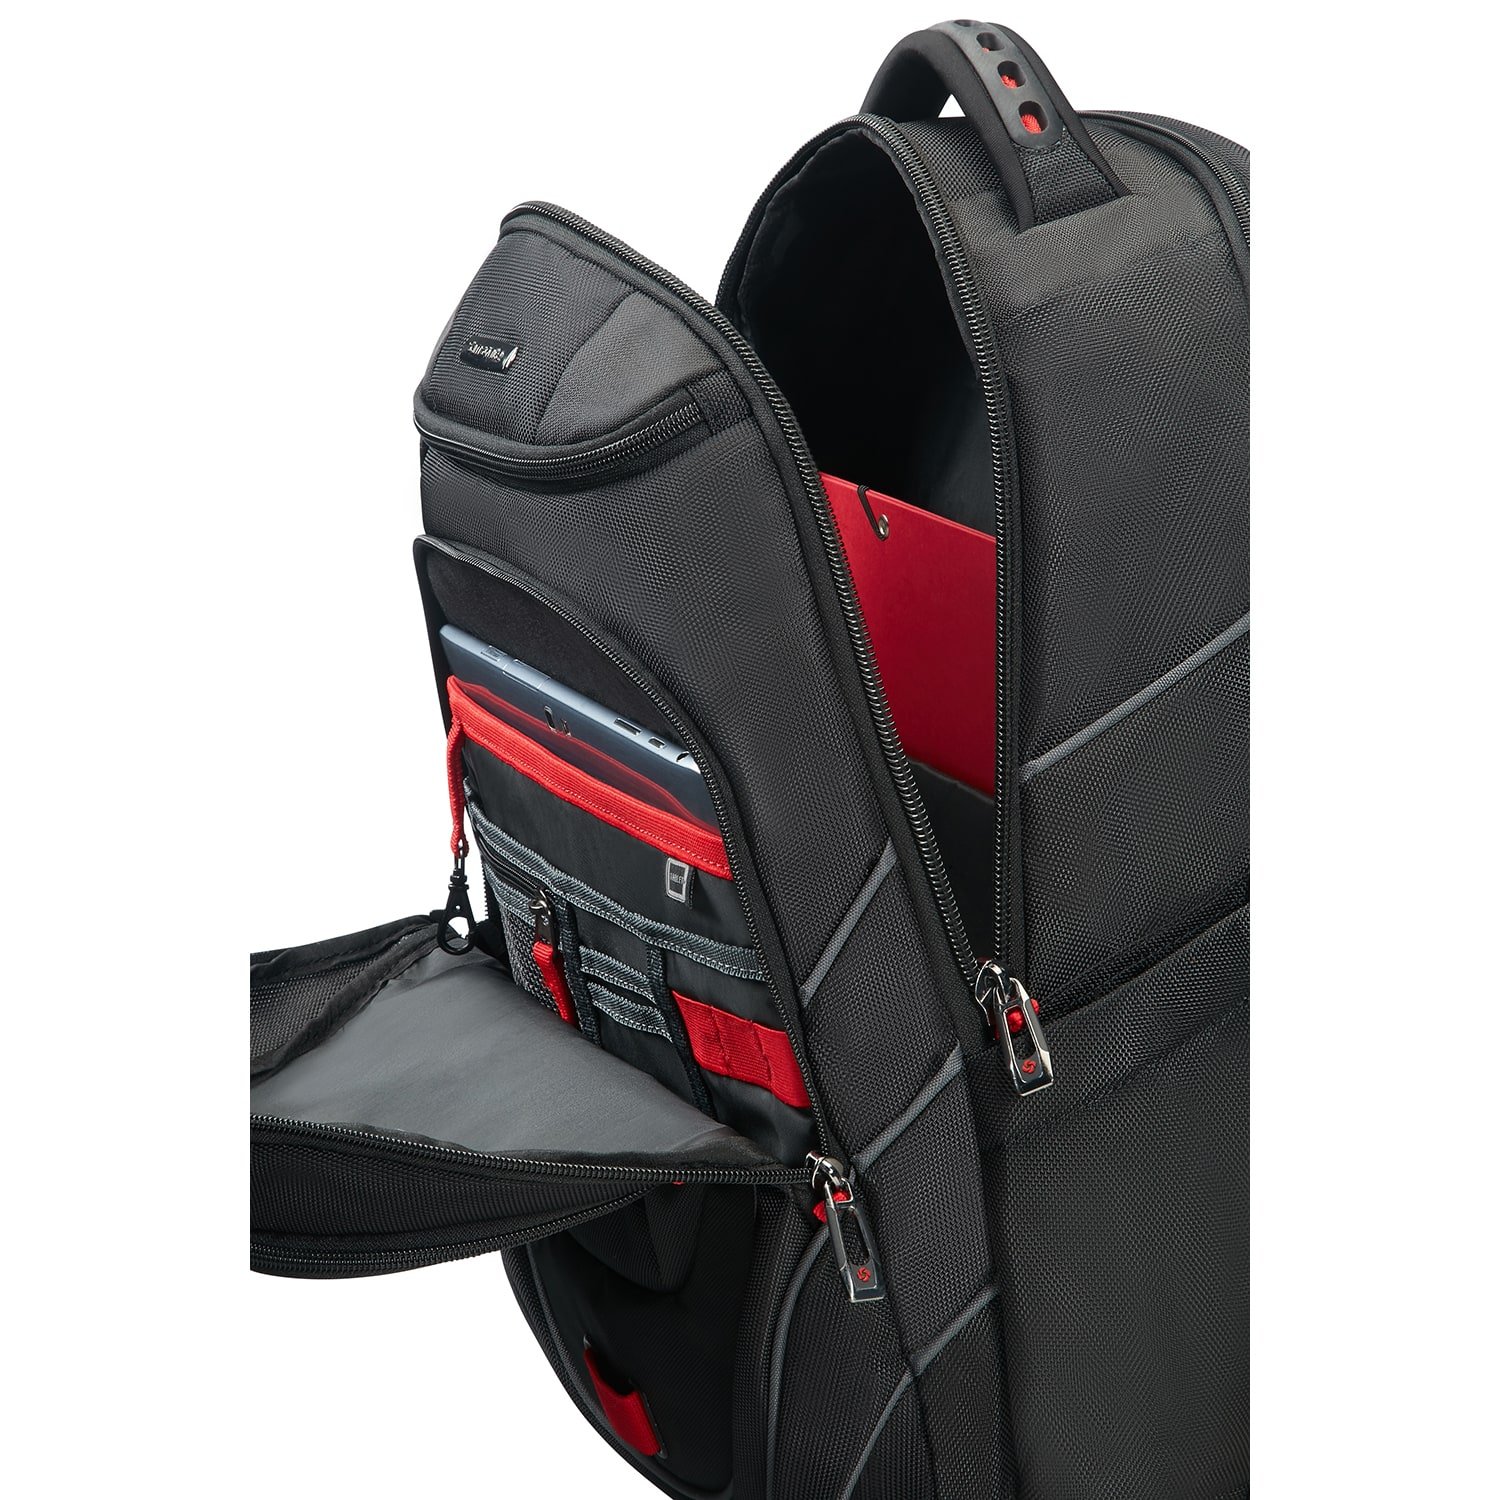 LEVIATHAN-LAPTOP BACKPACK 17.3" S59N-001-SF000*19